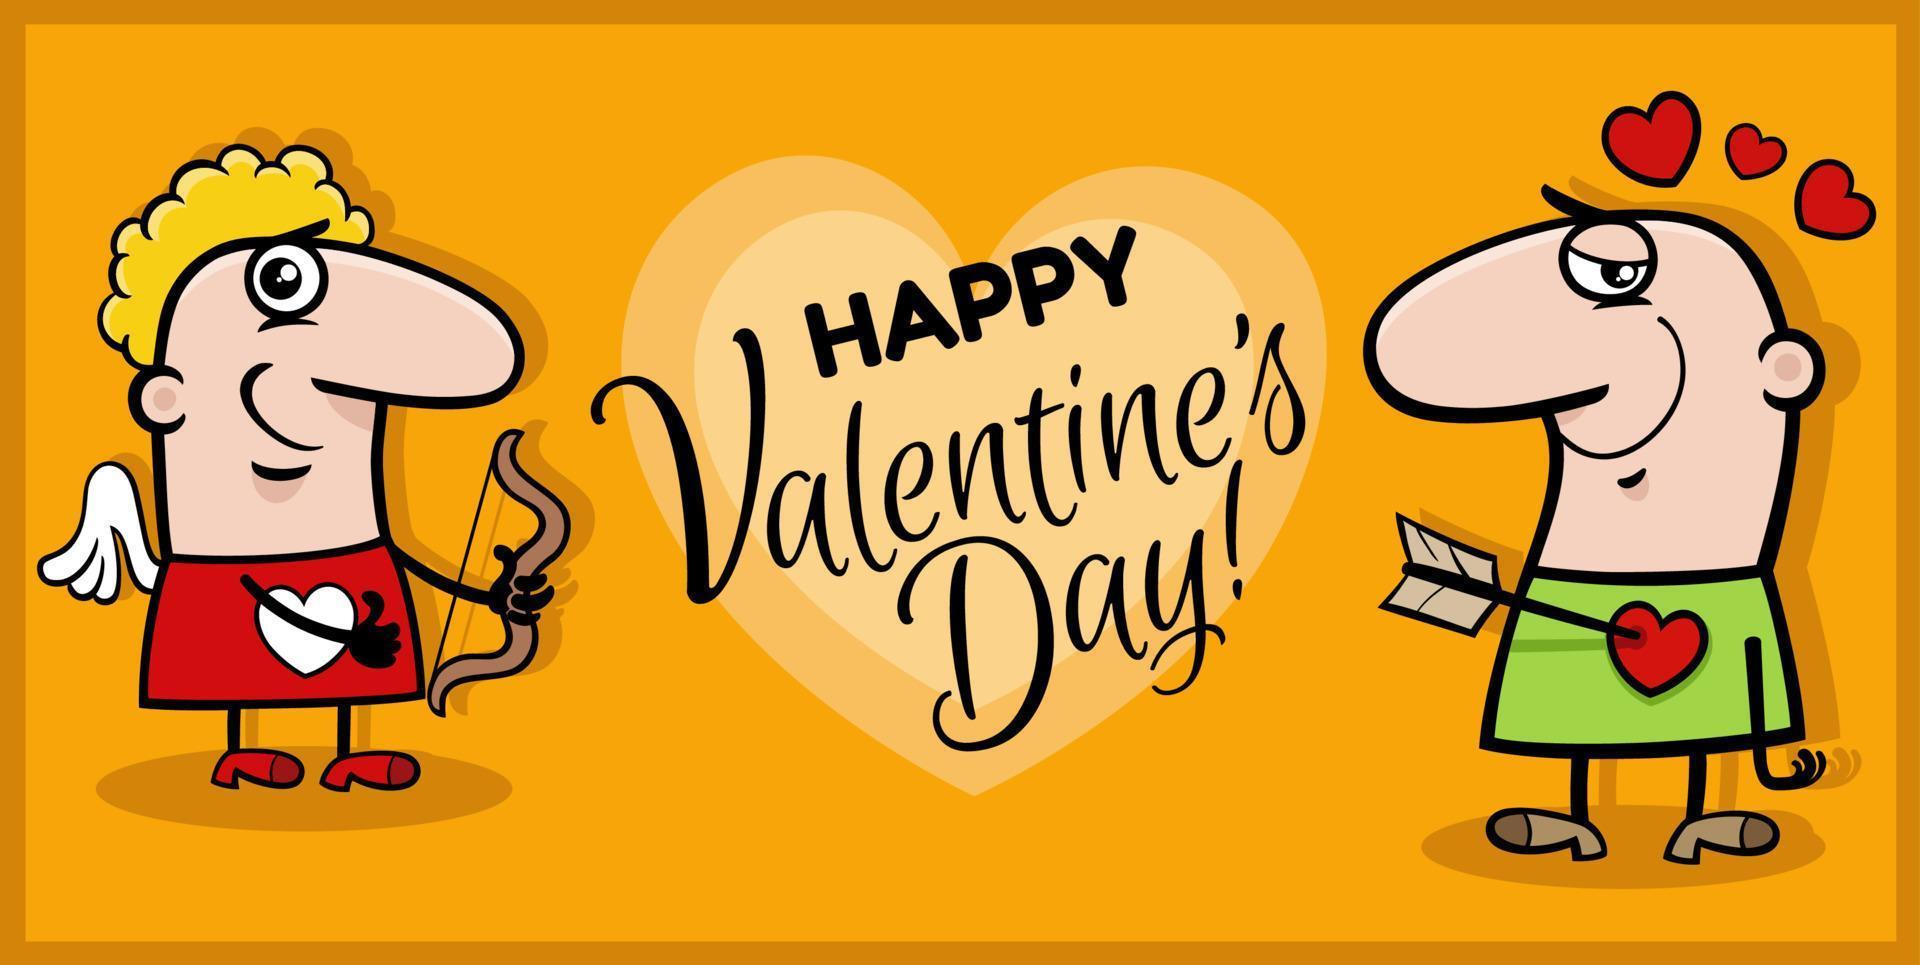 Valentines Day design with cartoon cupid and guy in love vector